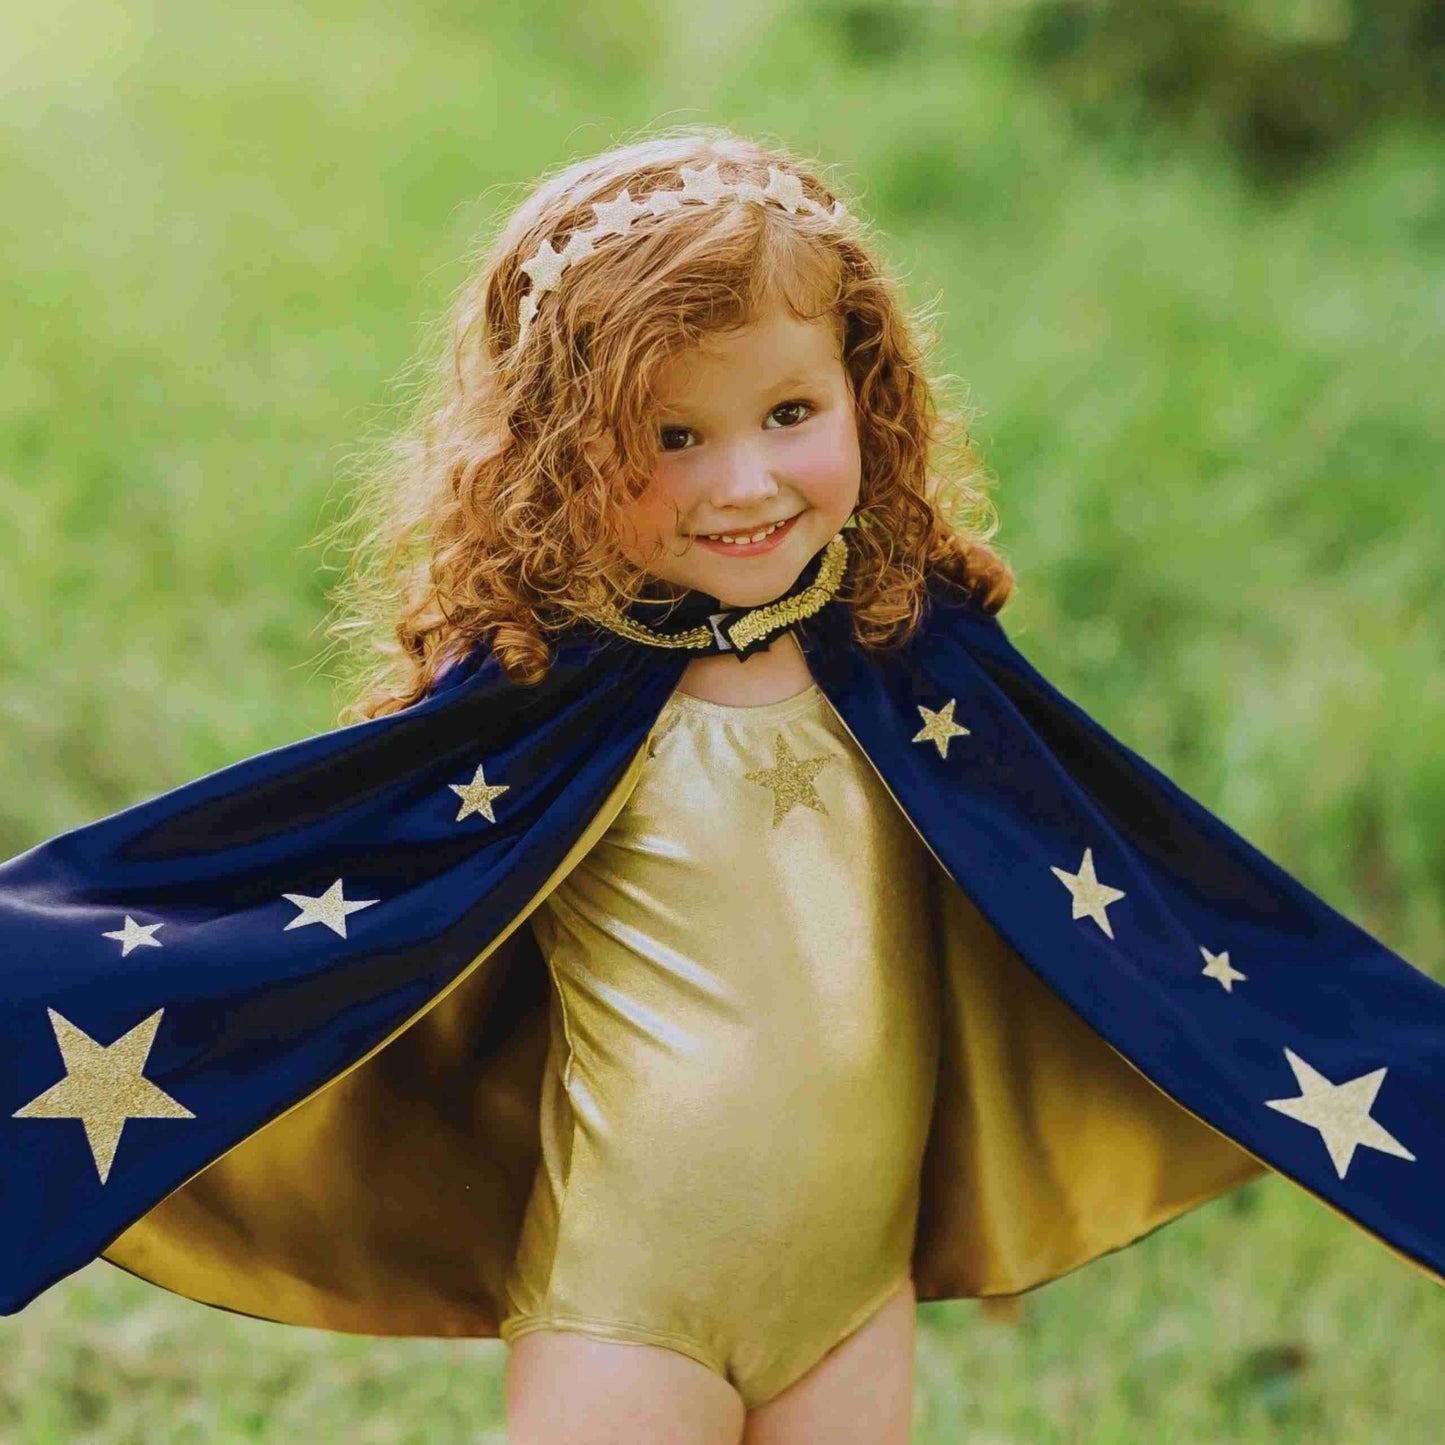 Personalized Kids' Magic Cape Set – Perfect for Young Magicians! - Navy & Gold